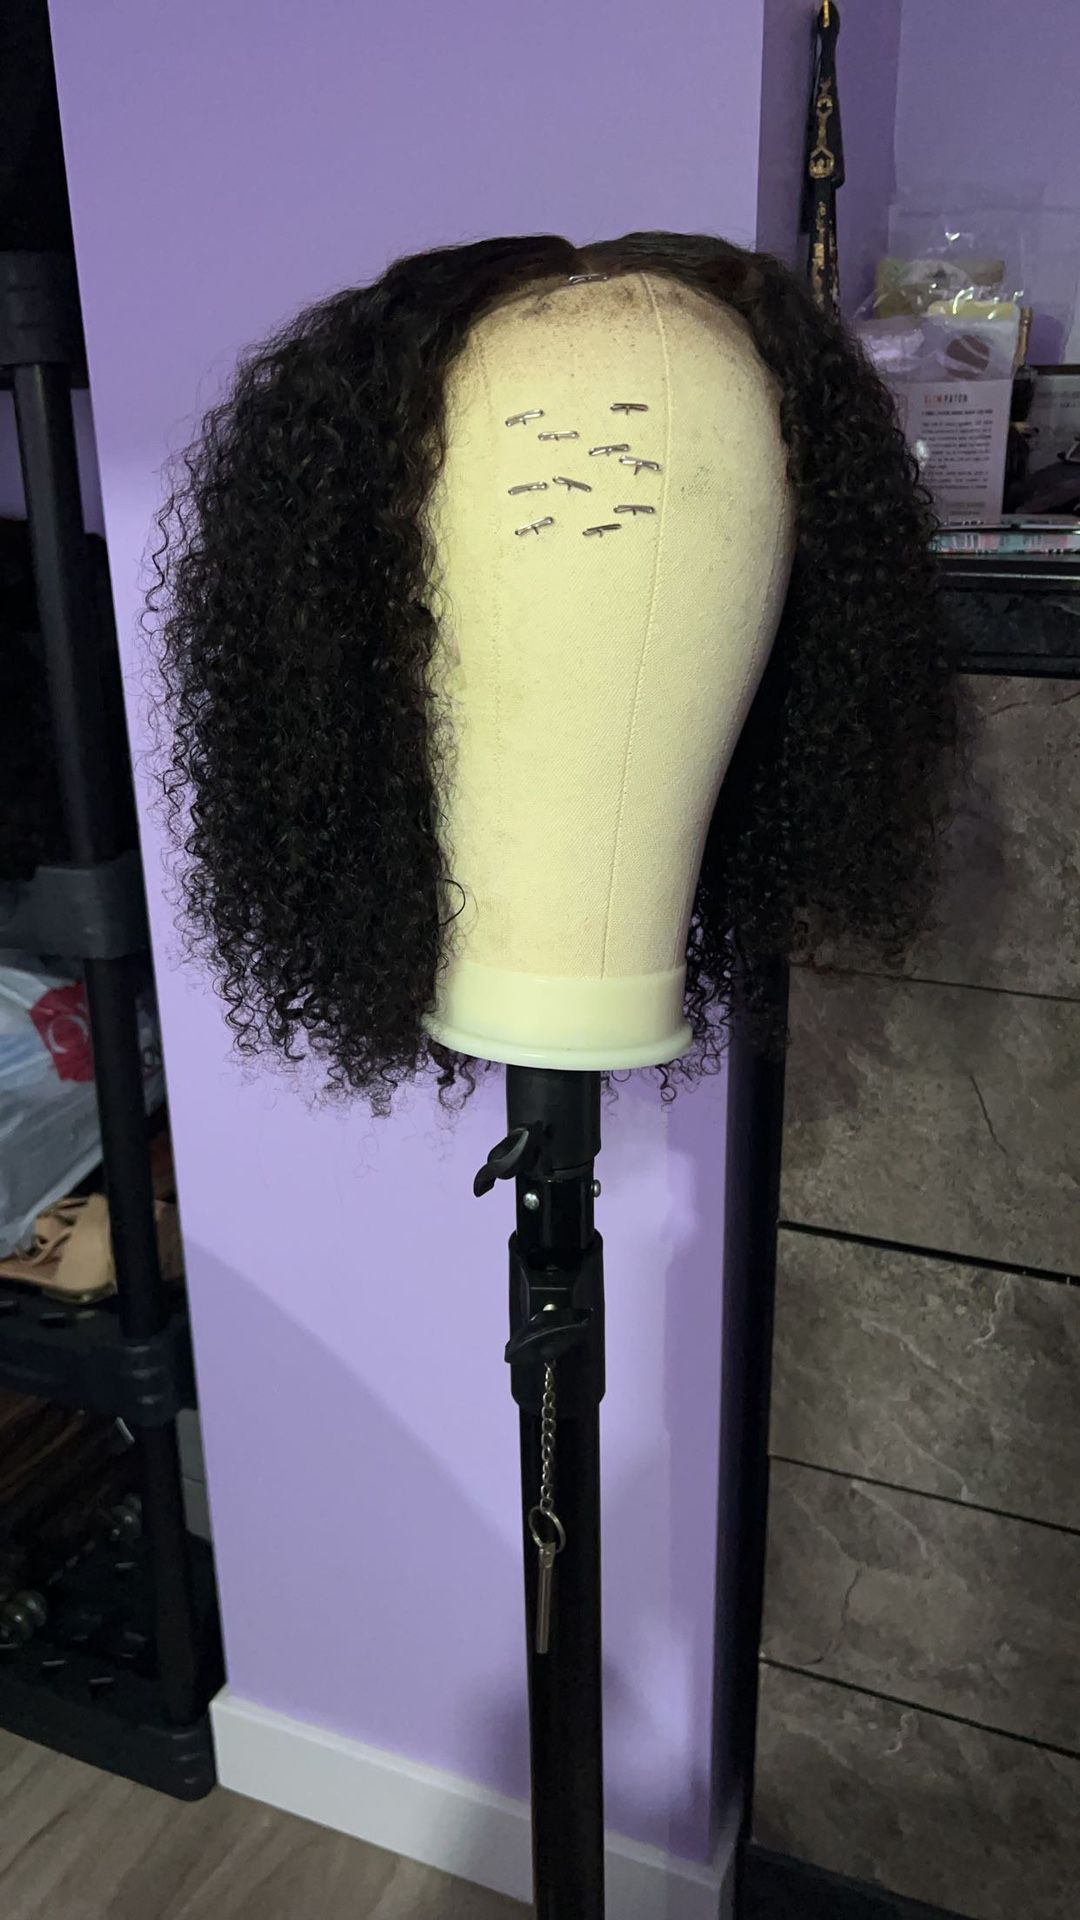 5 x 5 HD Lace front Human Hair 